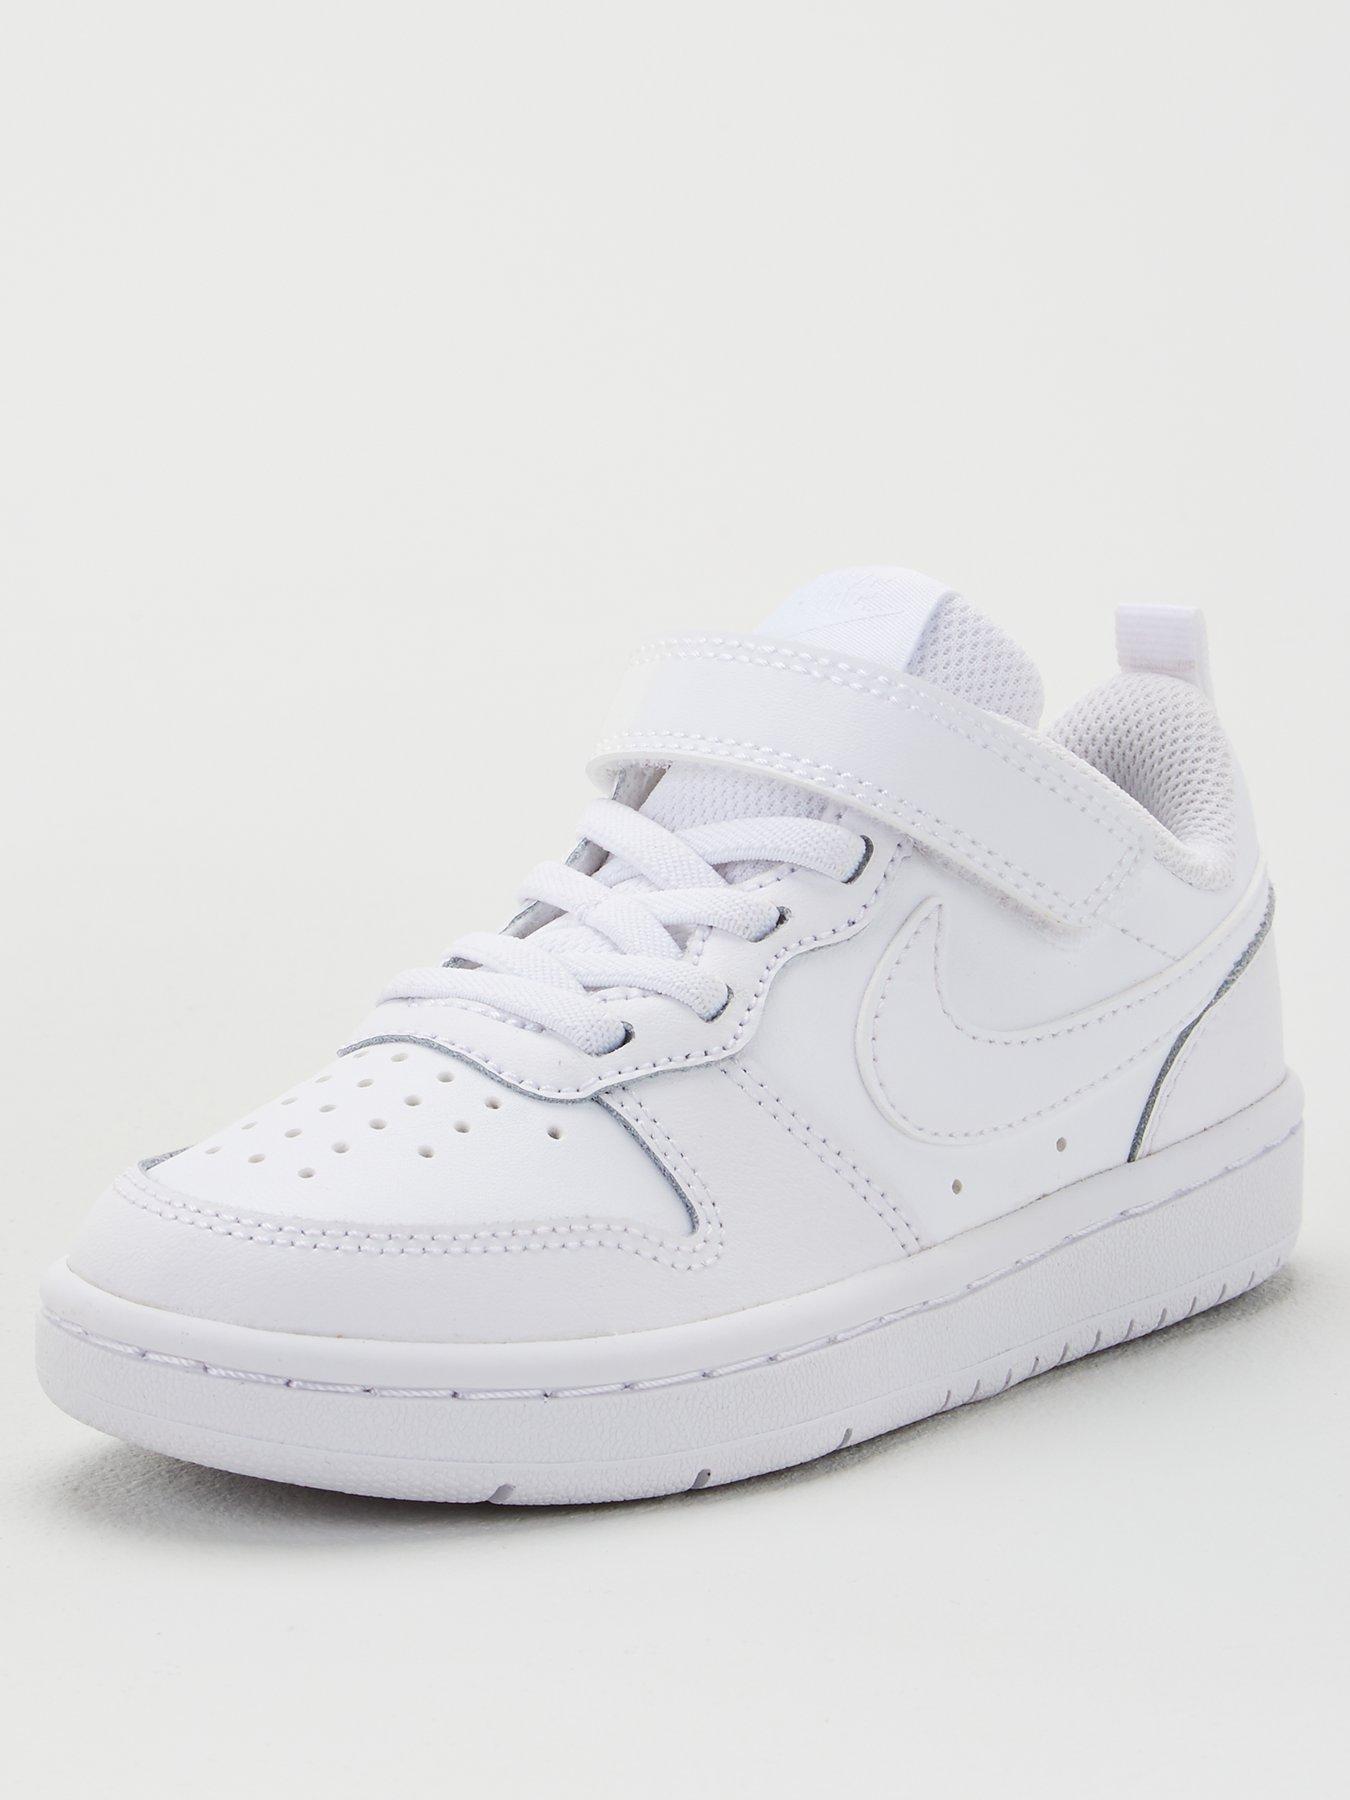 Nike Court Borough Low 2 Childrens Trainers White/White very co uk